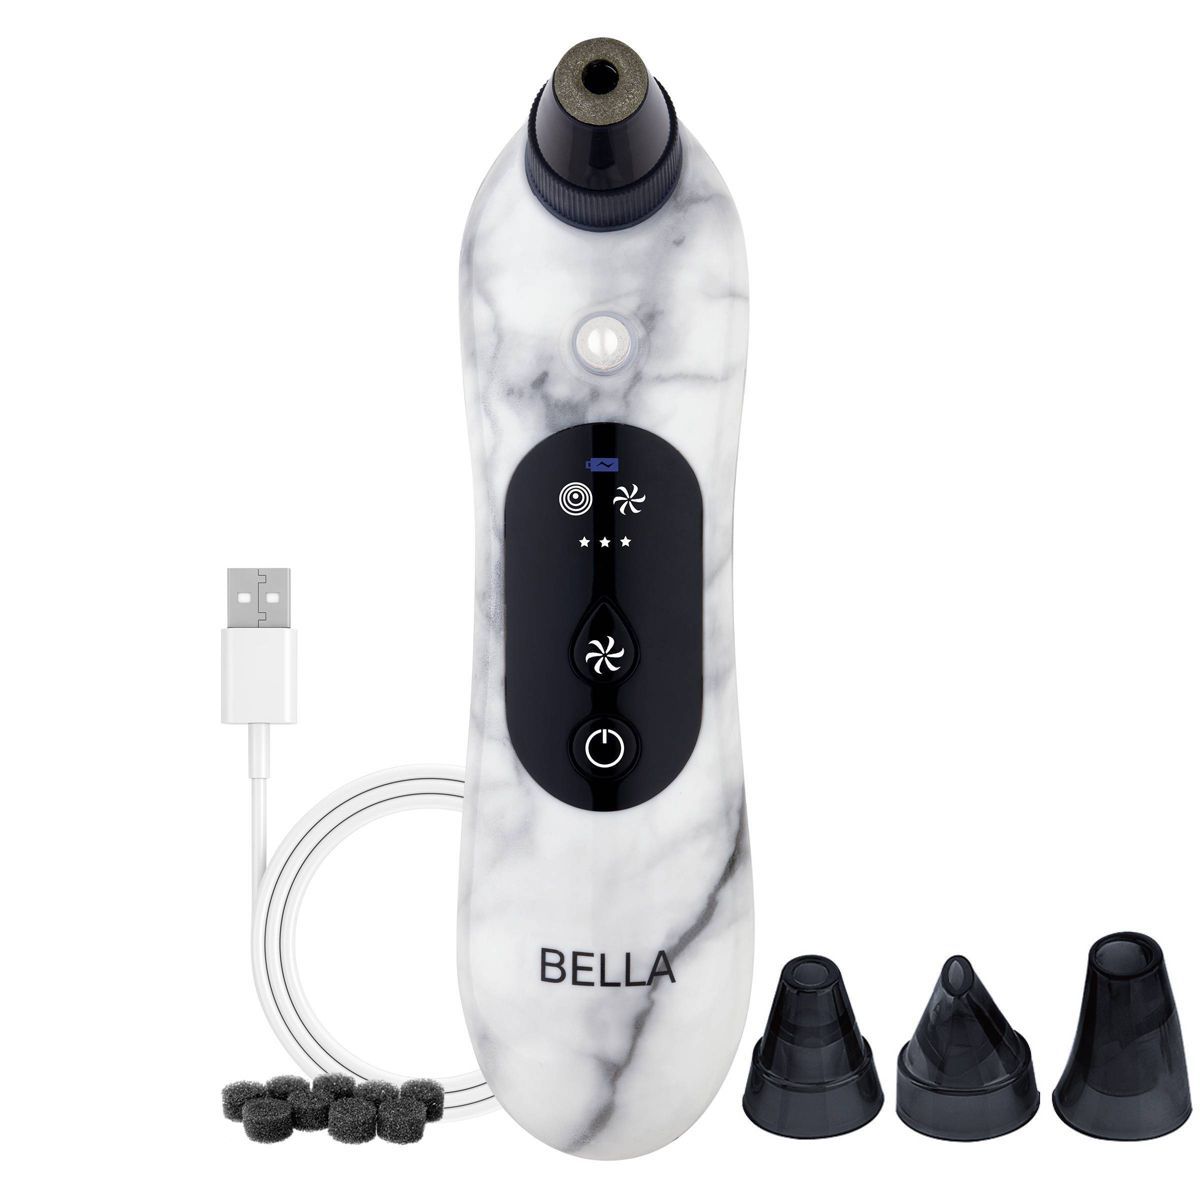 Spa Sciences BELLA 3-in-1 Diamond Tip Microdermabrasion System, with Nano Mist & Pore Extraction | Target